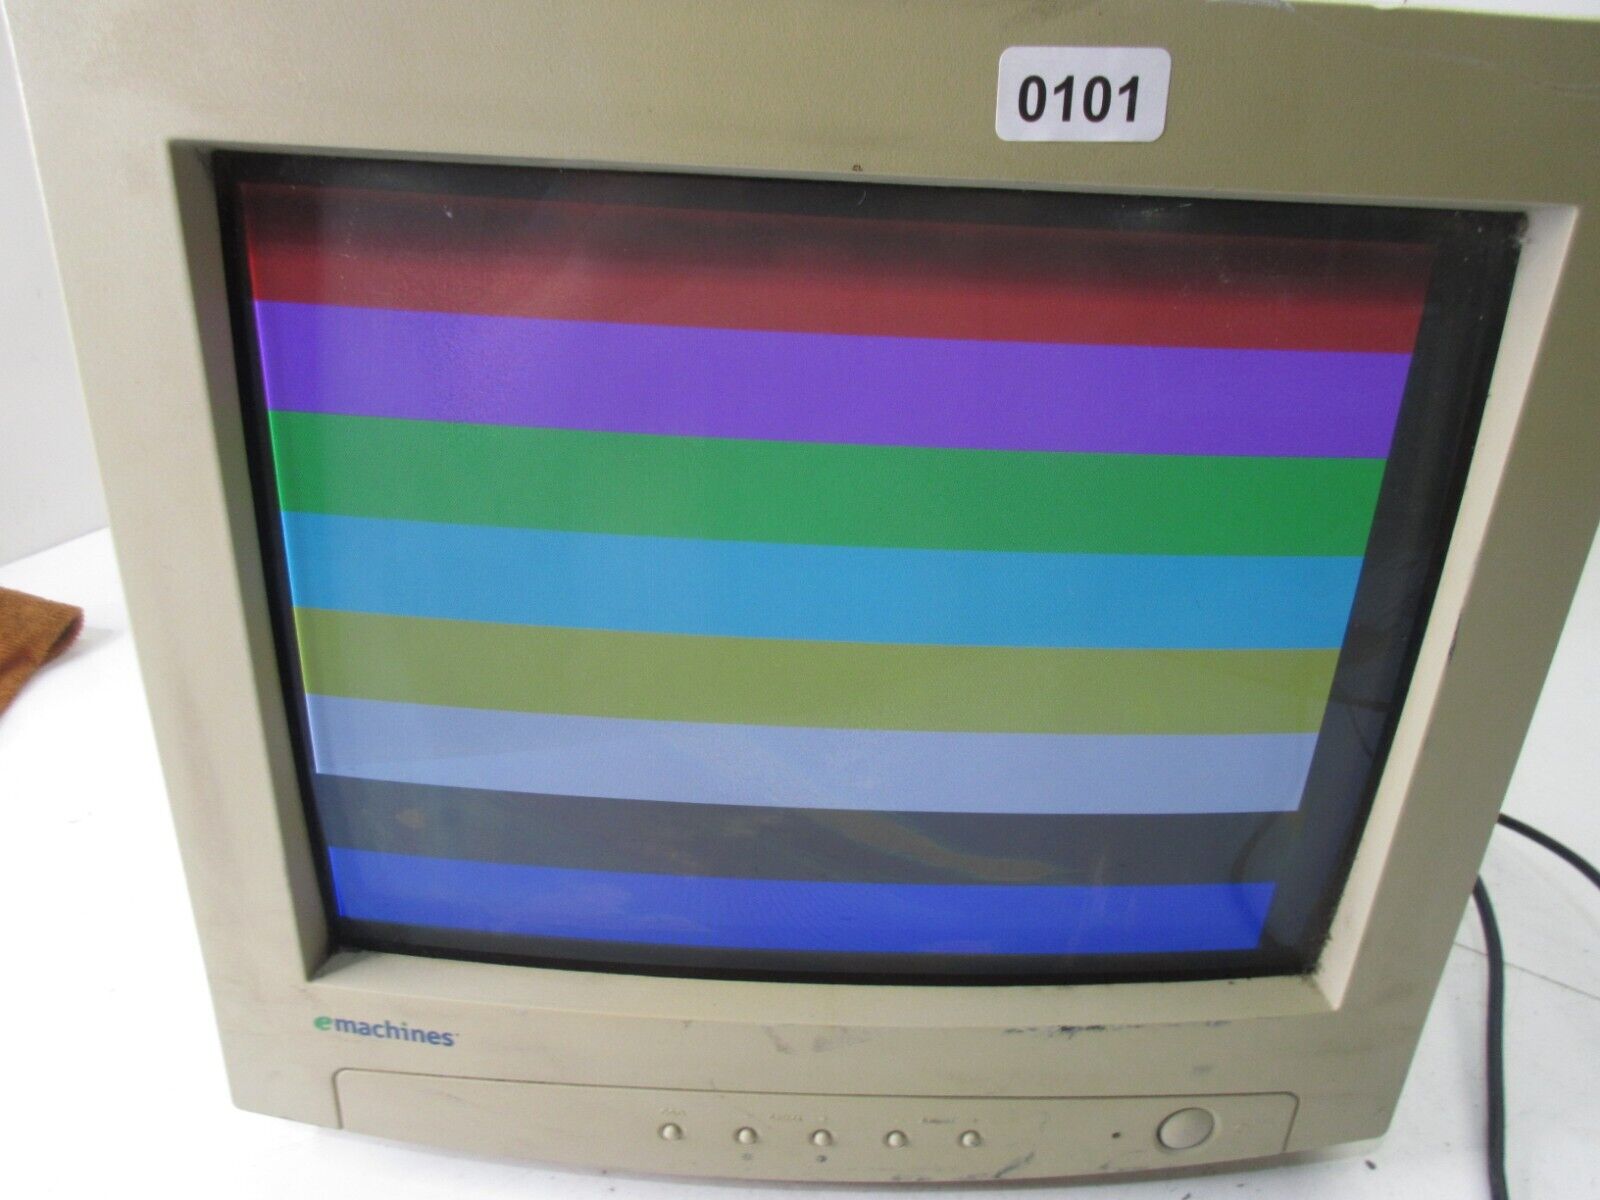 eMachines eView 17r CRT Monitor Vintage Retro Gaming